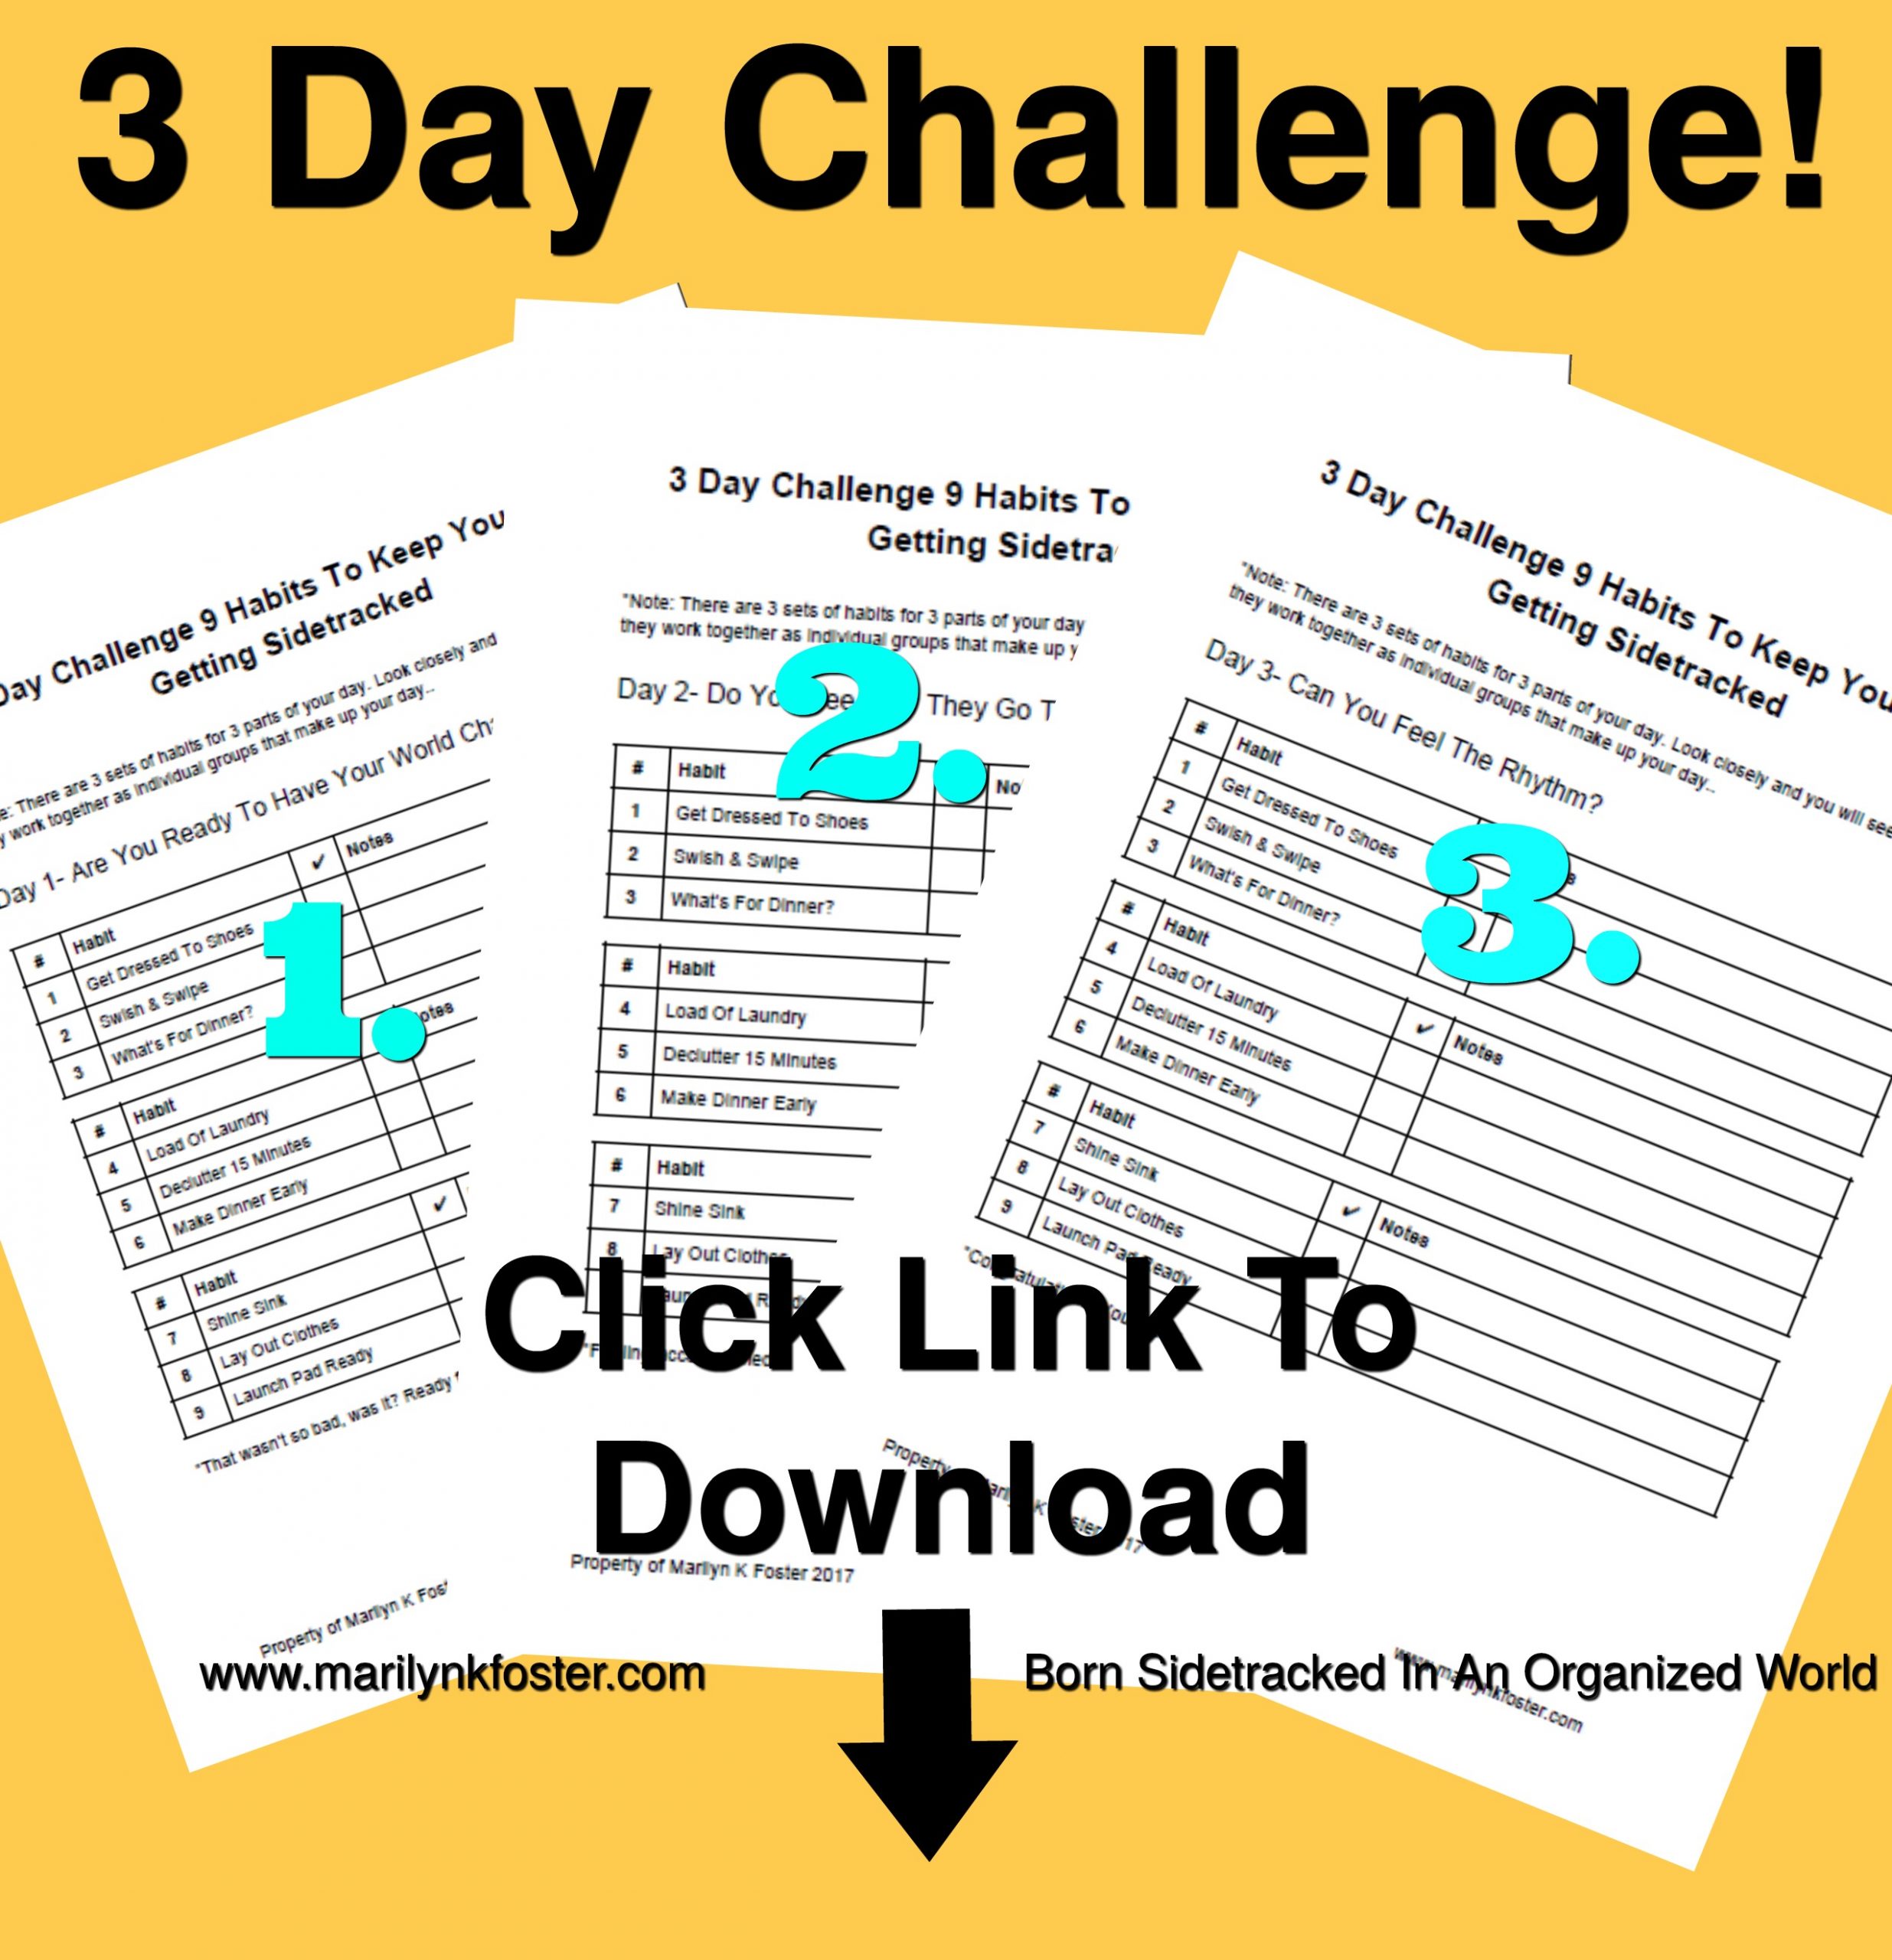 Take the 3 Day Challenge